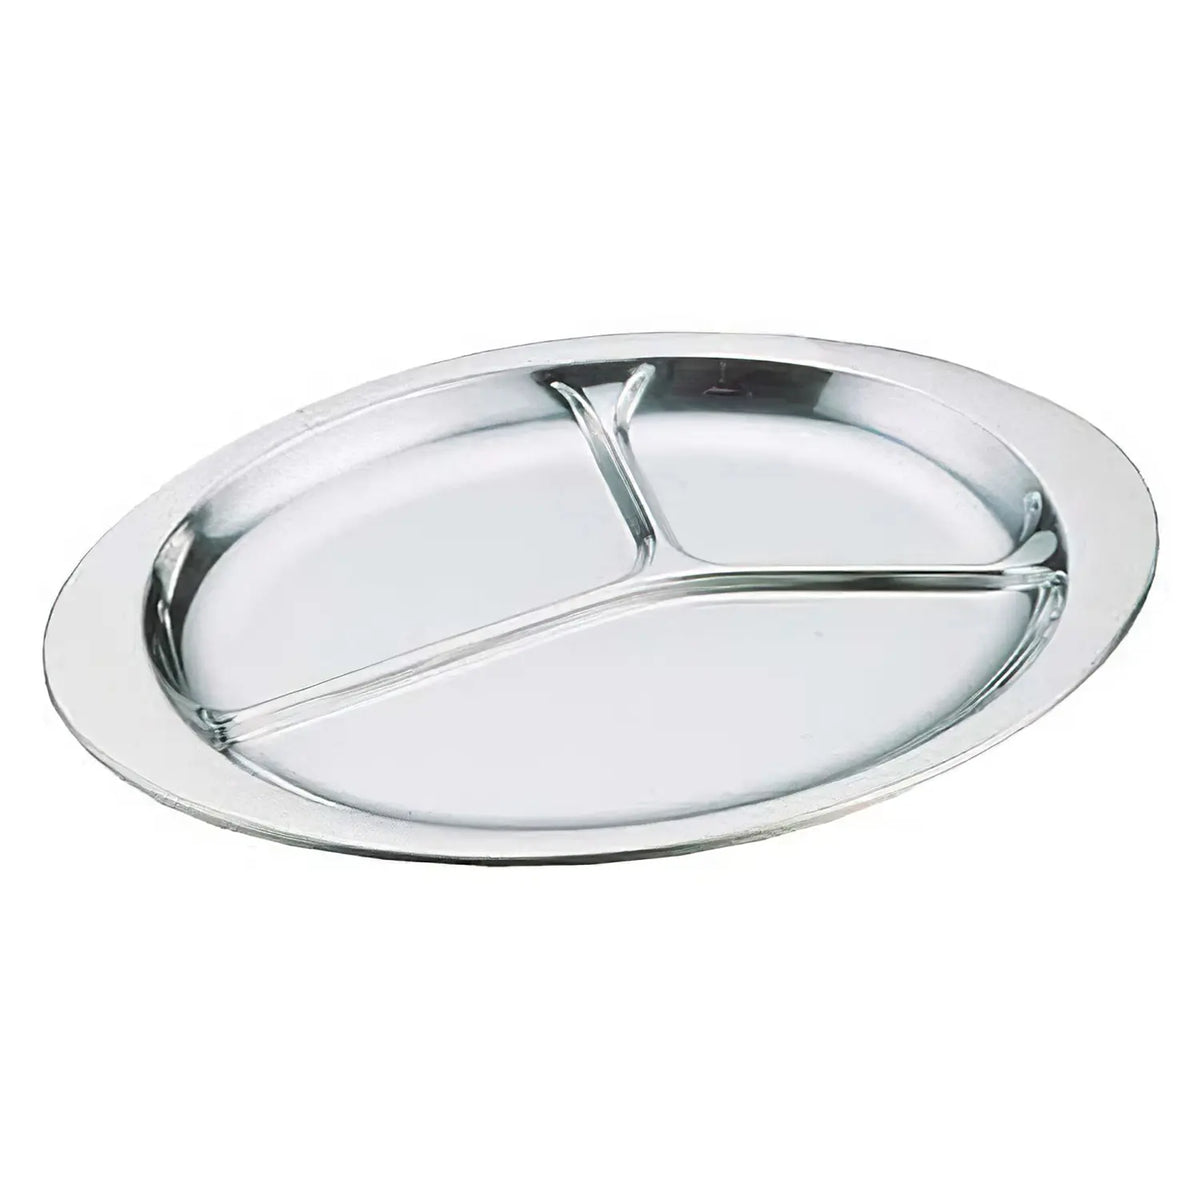 IKD ecoclean Stainless Steel 3 Compartments Oval Lunch Plate